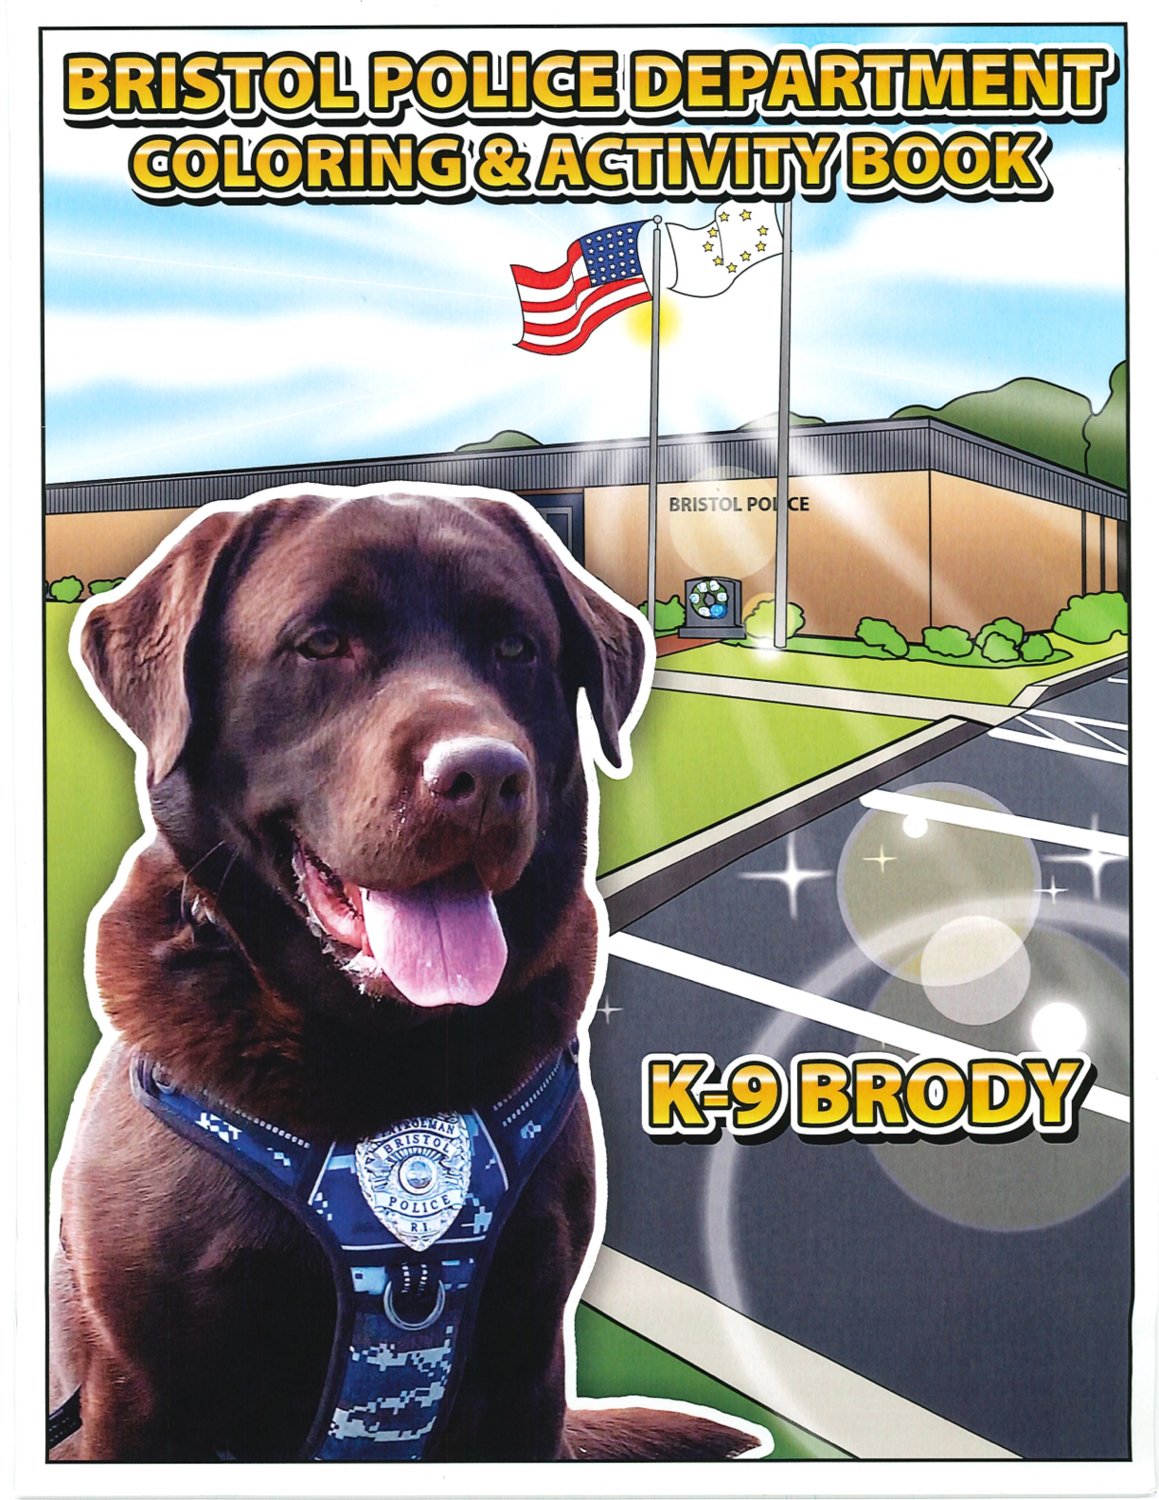 K9 Brody is featured on the front cover of the department’s new coloring book, which includes puzzles and uplifting messages for children encouraging them to be on the lookout for themselves and others.